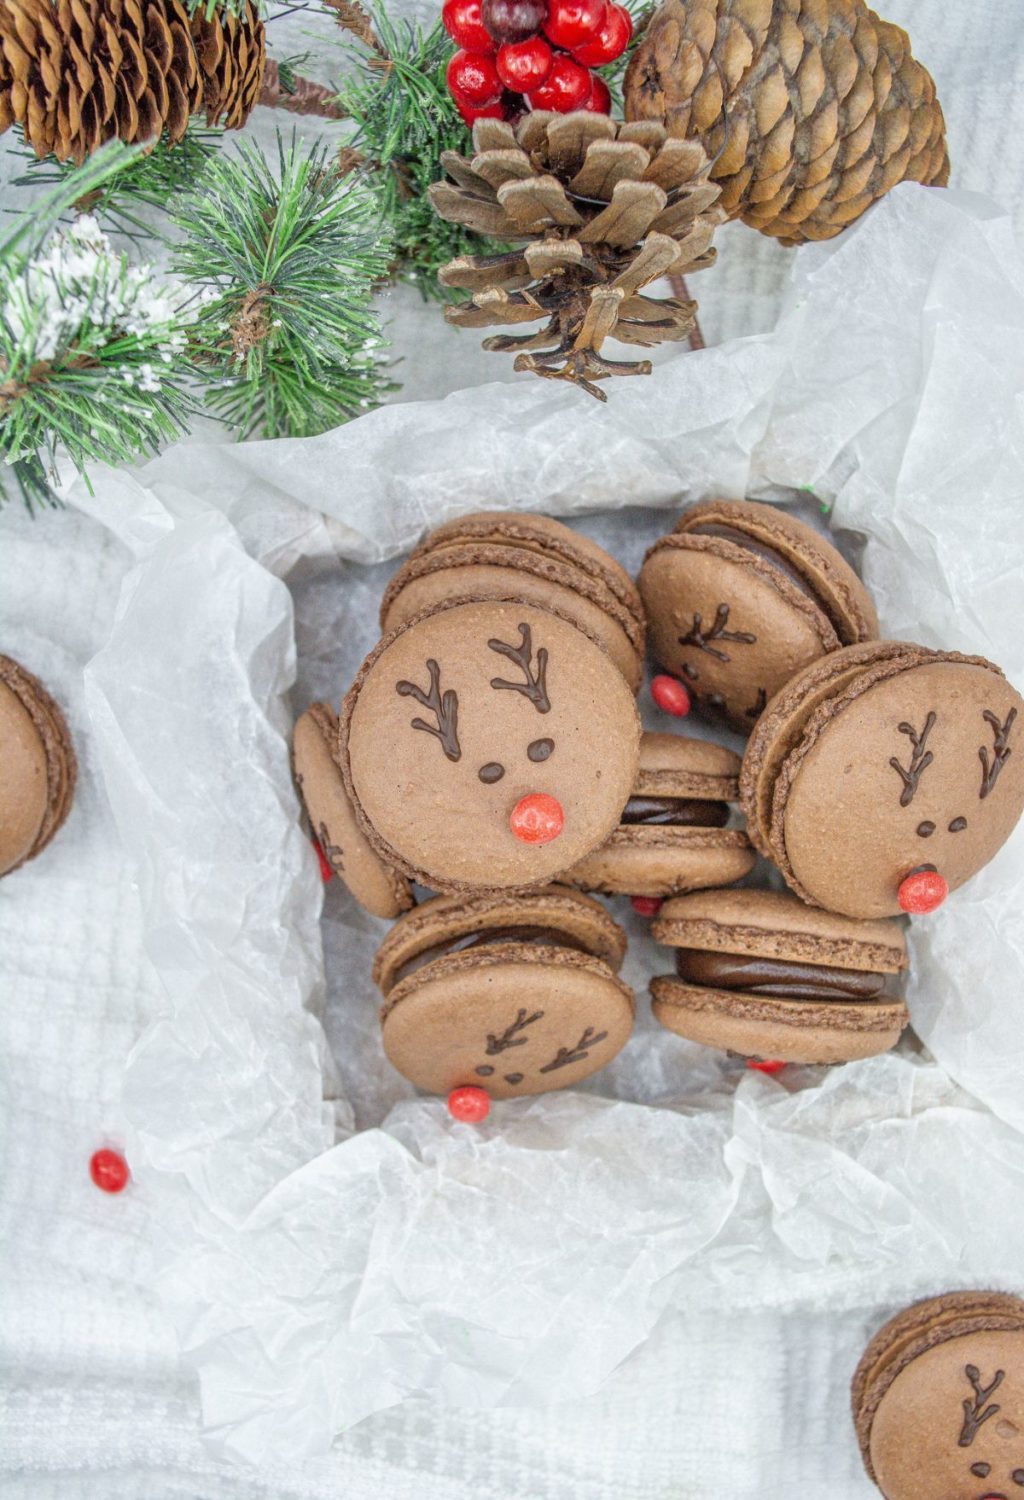 Chocolate reindeer macarons with pine cones and pinecones.